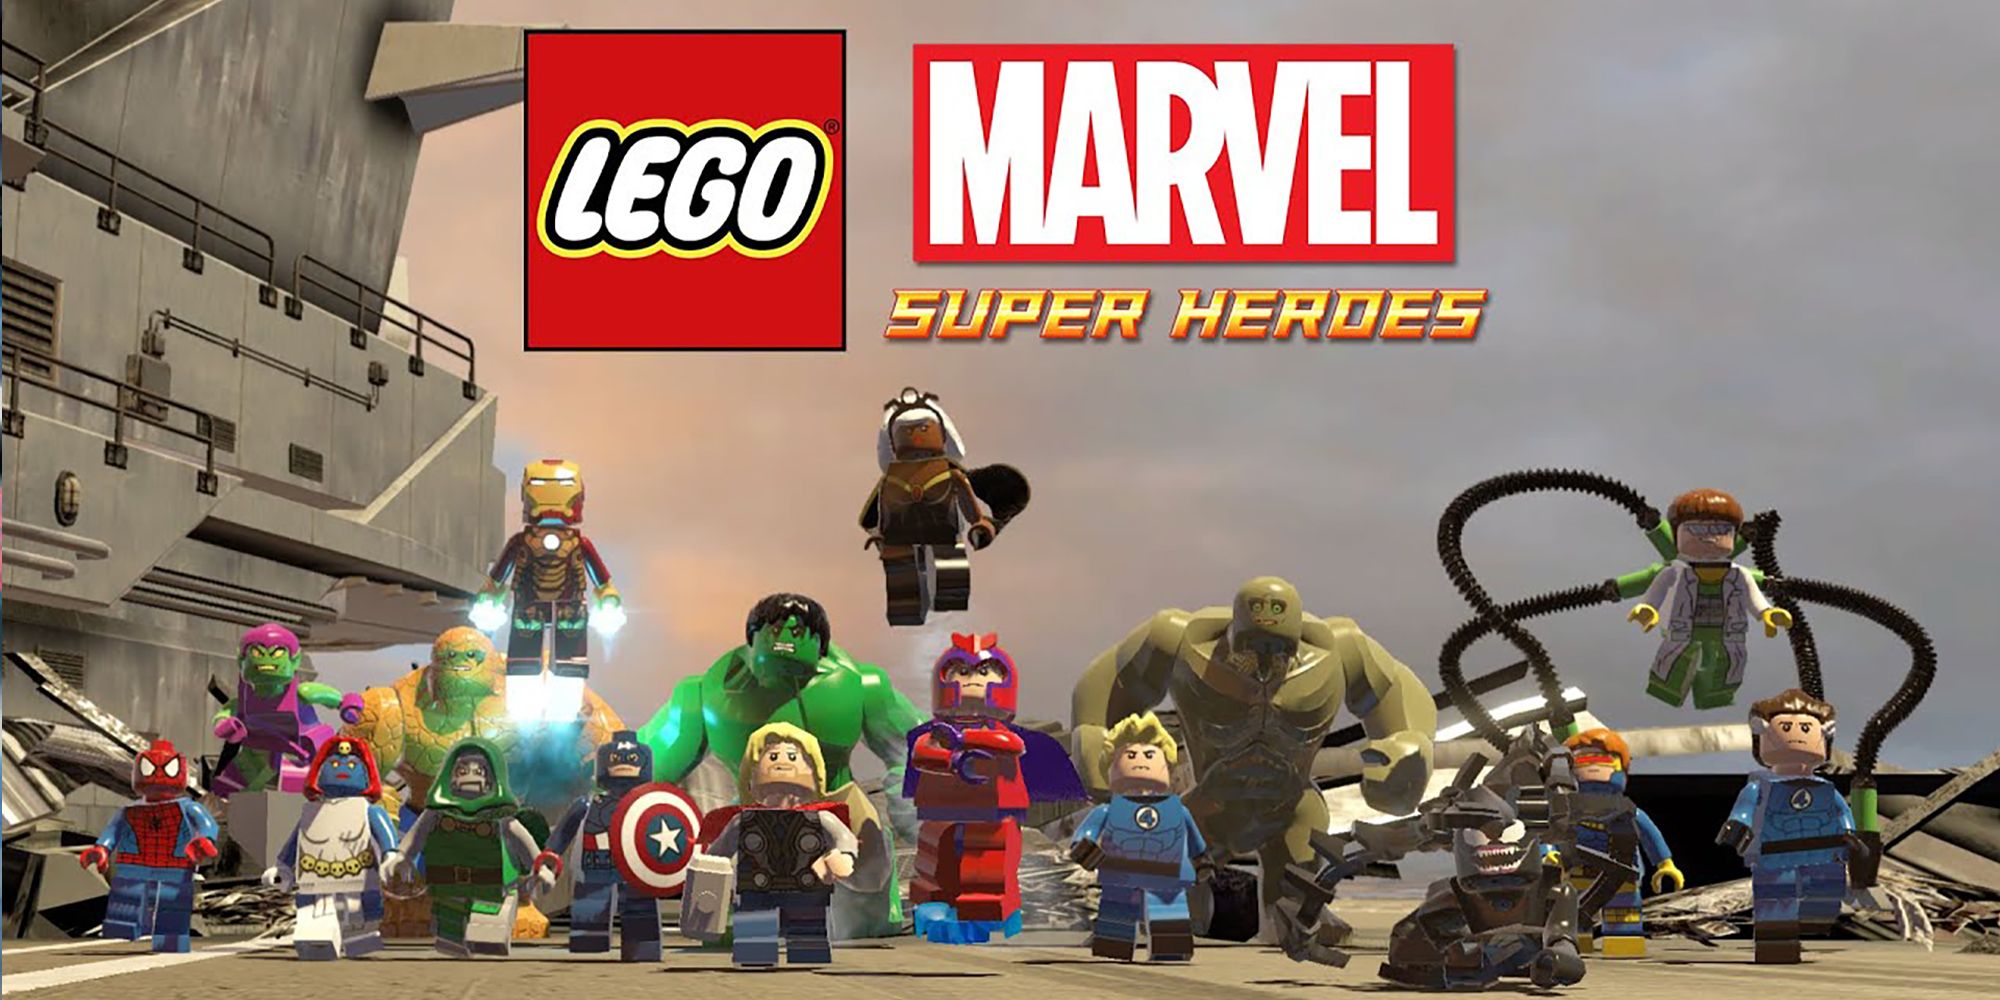 A Poster For LEGO Marvel Super Heroes